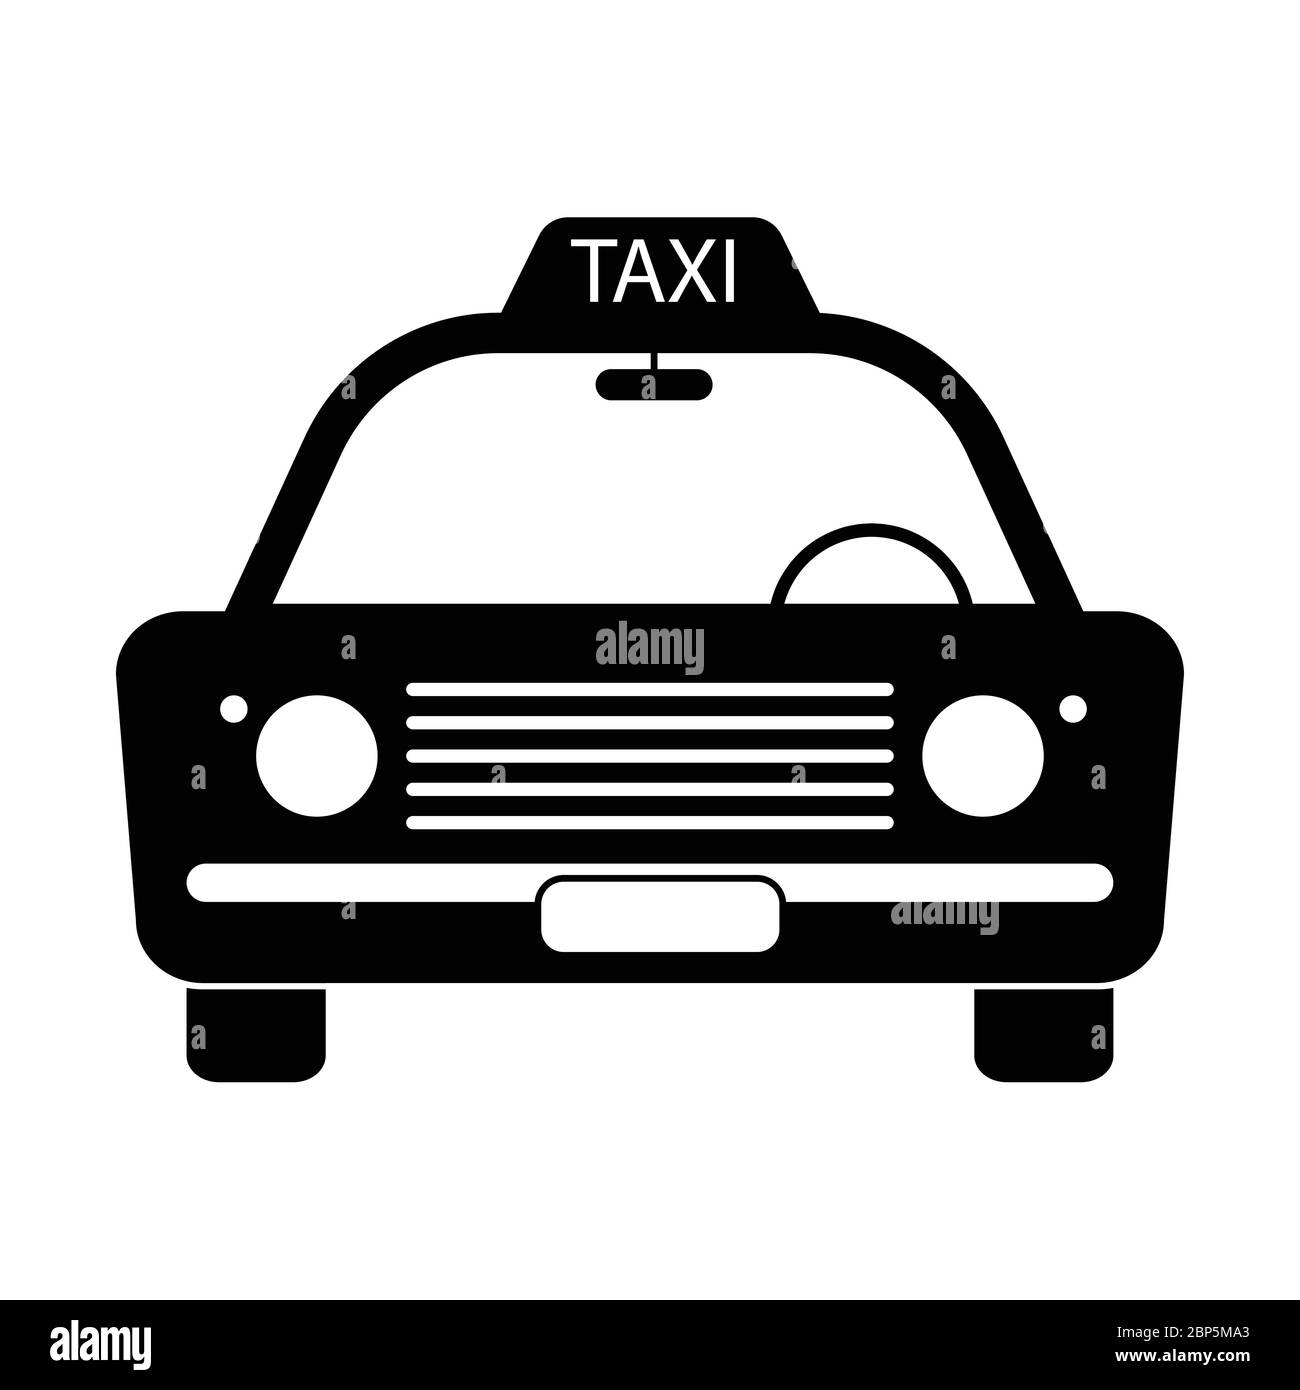 Taxi Cab Vintage Old Front View. Taxicab car automobile black and white illustration. EPS Vector Stock Vector